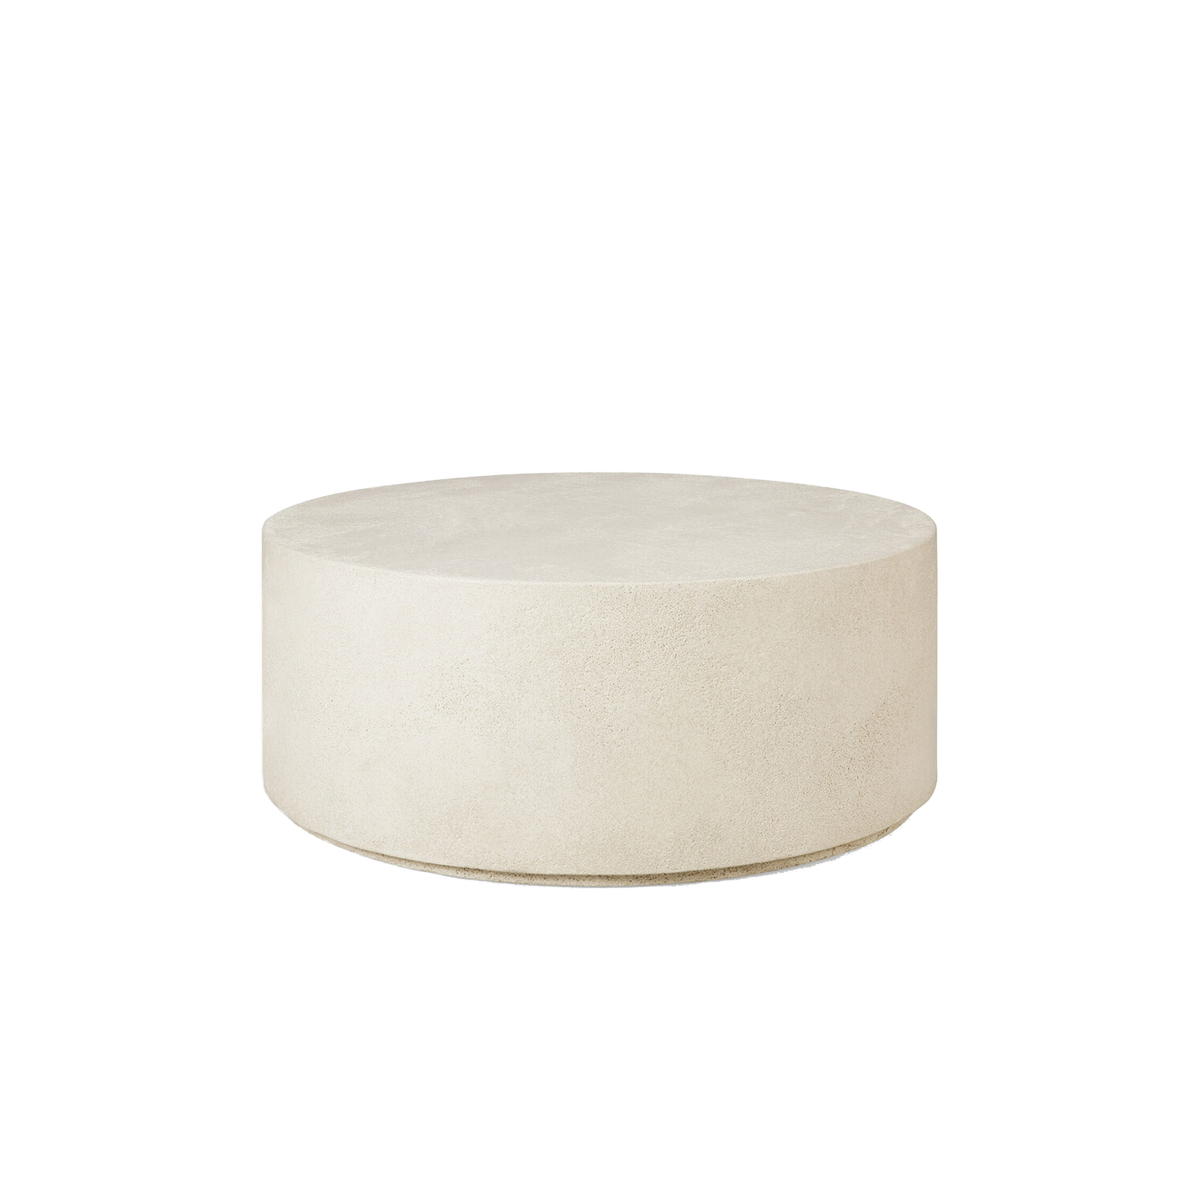 Defined by elegant simplicity, the Sola Round Coffee Table is where seamless and softened forms seamlessly merge with textural character under the skilled hands of artisans.